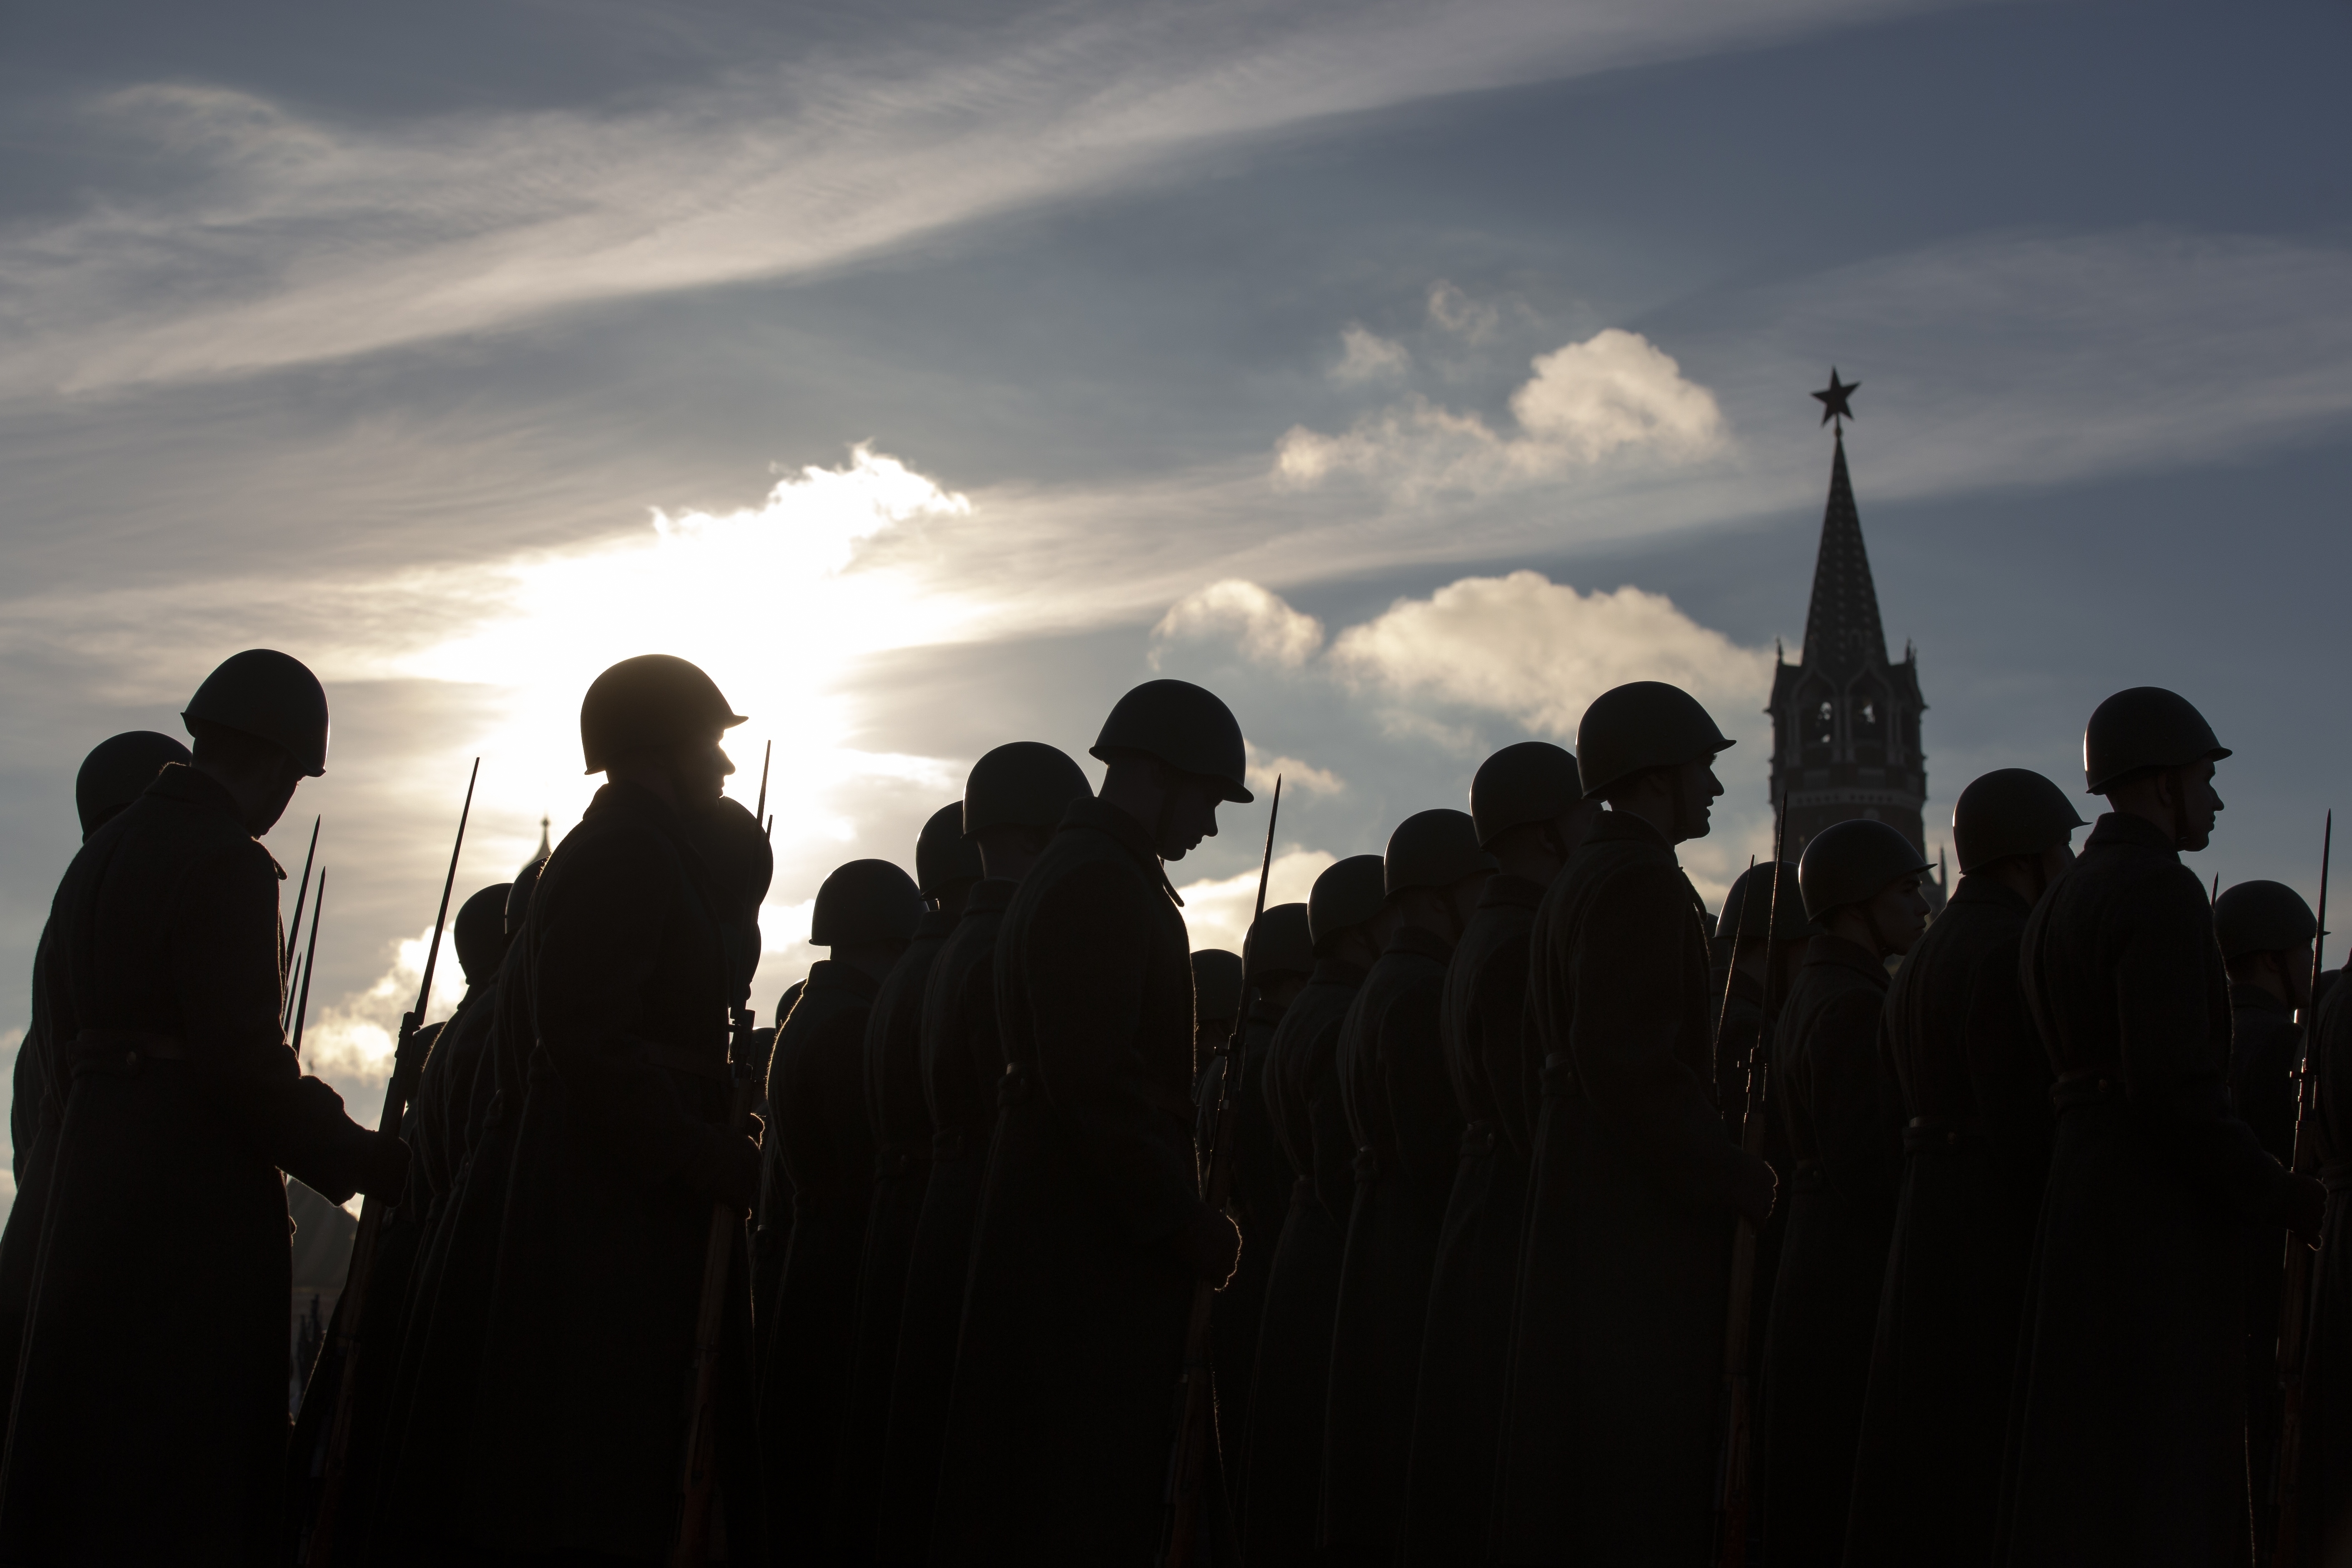 Russian soldiers dressed in Red Army World War II uniforms stand prior to the start of a rehearsal of the Nov. 7 parade in Red Square, with the Spasskaya Tower in the background, in Moscow, Russia, Monday, Nov. 5, 2018. The parade marks the 77th anniversary of a World War II historic parade in Red Square and honored the participants in the Nov. 7, 1941 parade who headed directly to the front lines to defend Moscow from the Nazi forces. (AP Photo/Alexander Zemlianichenko)